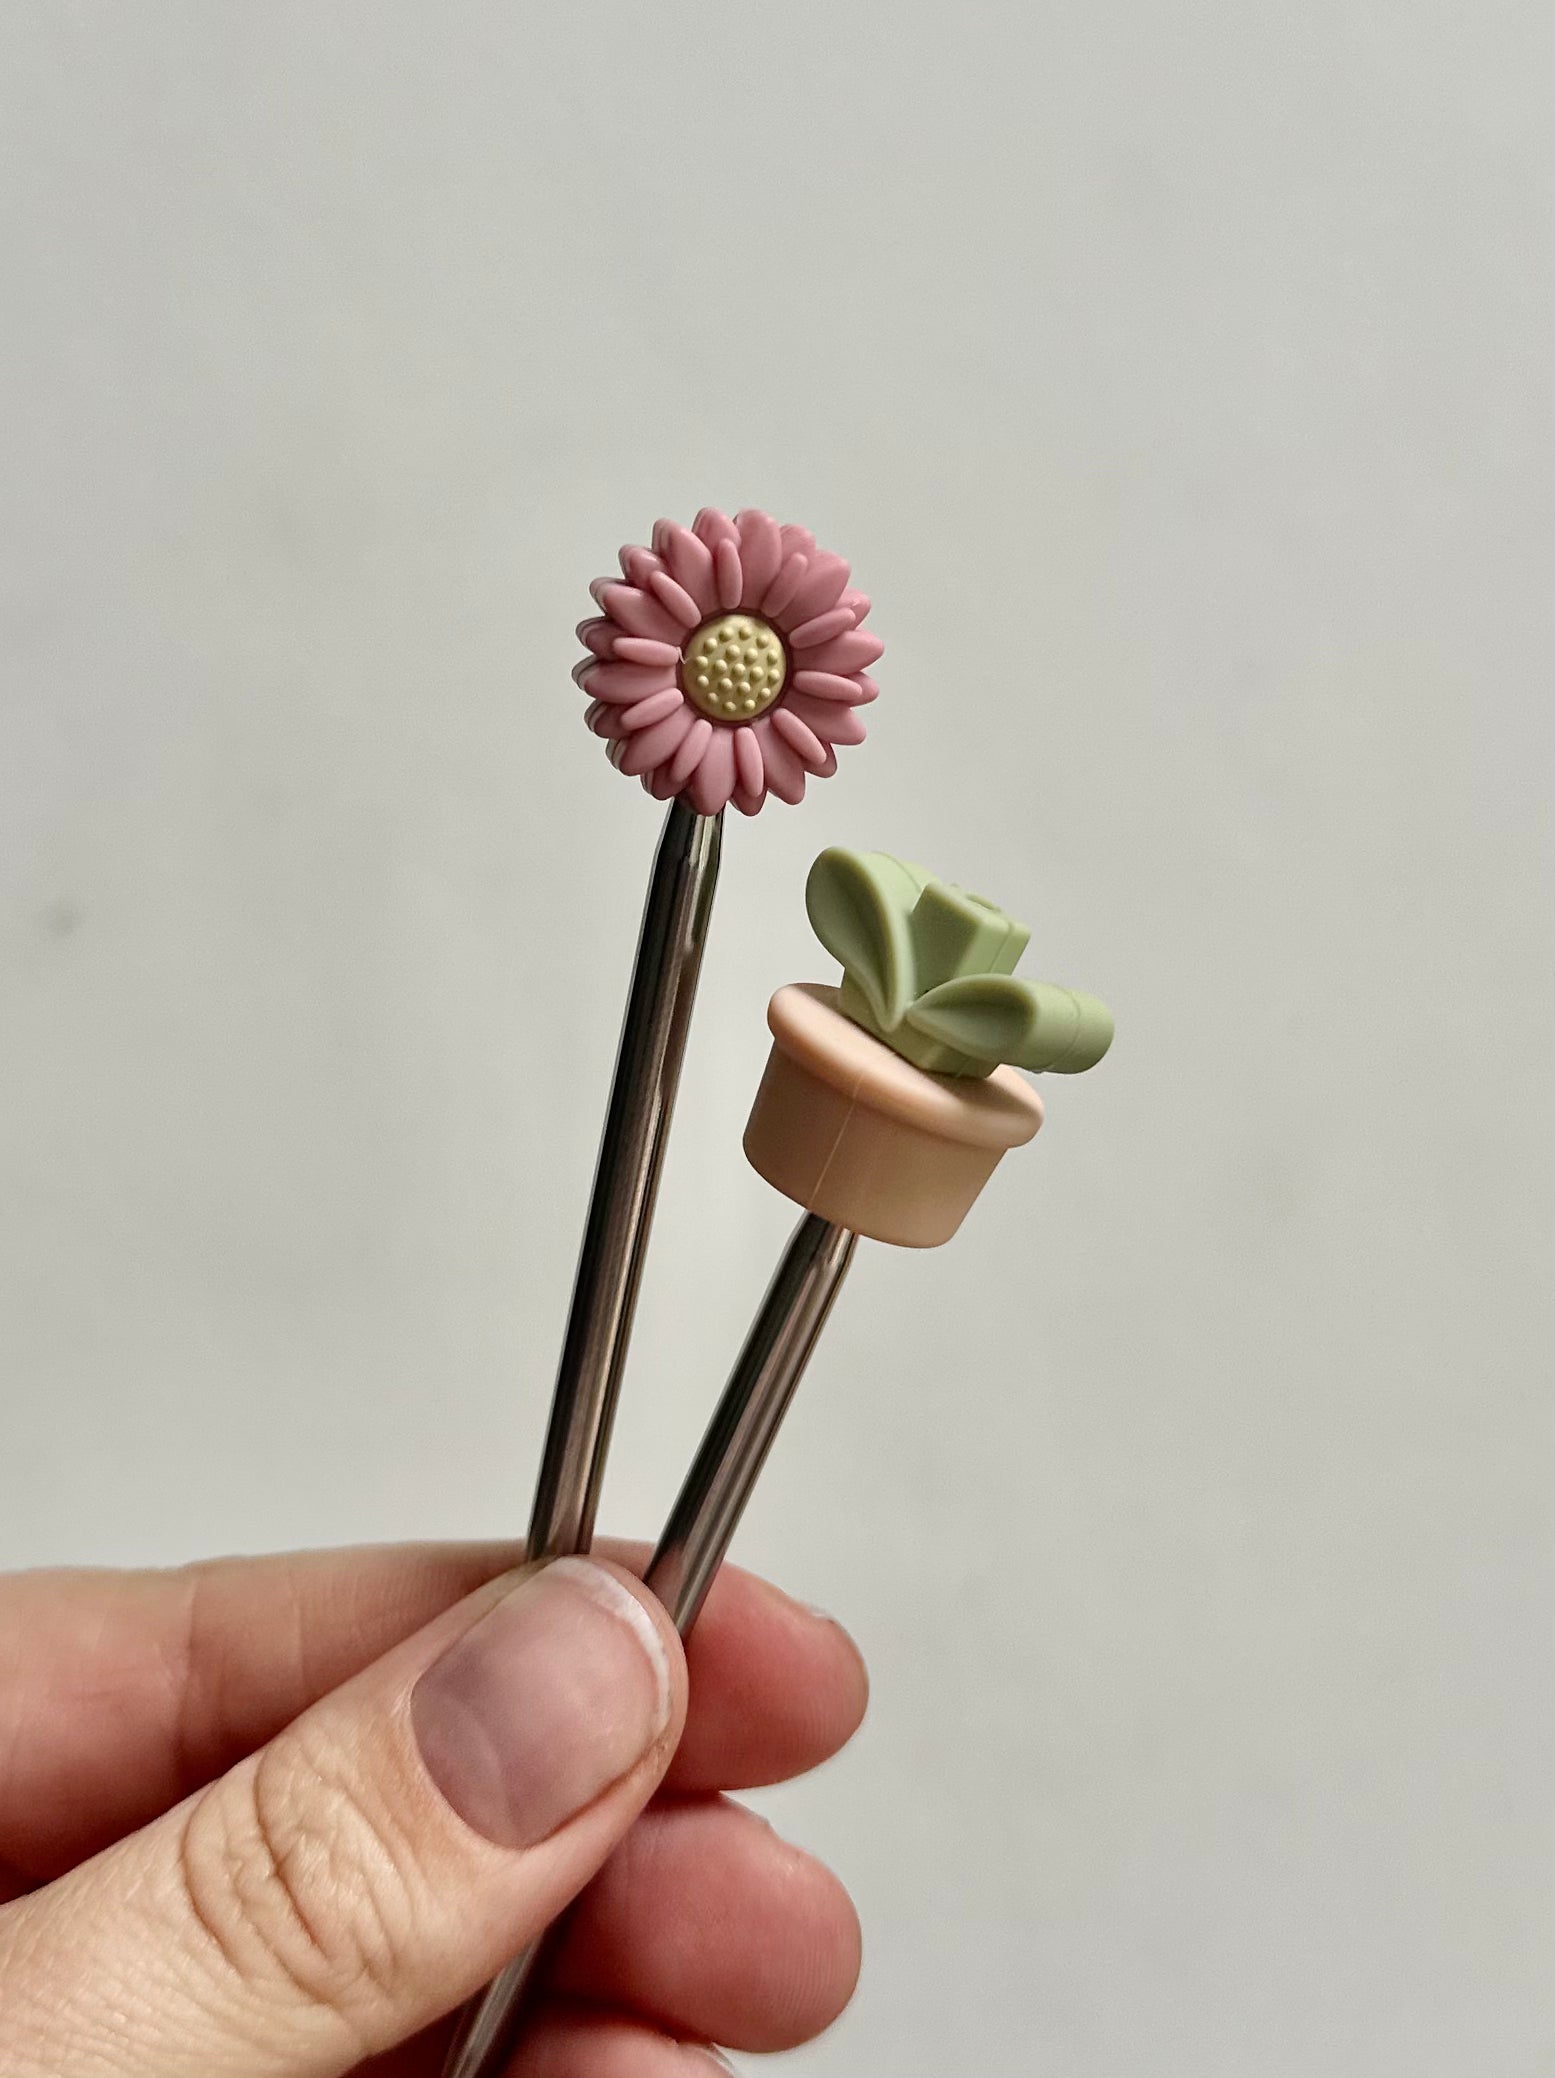 Knitting Needle Stoppers